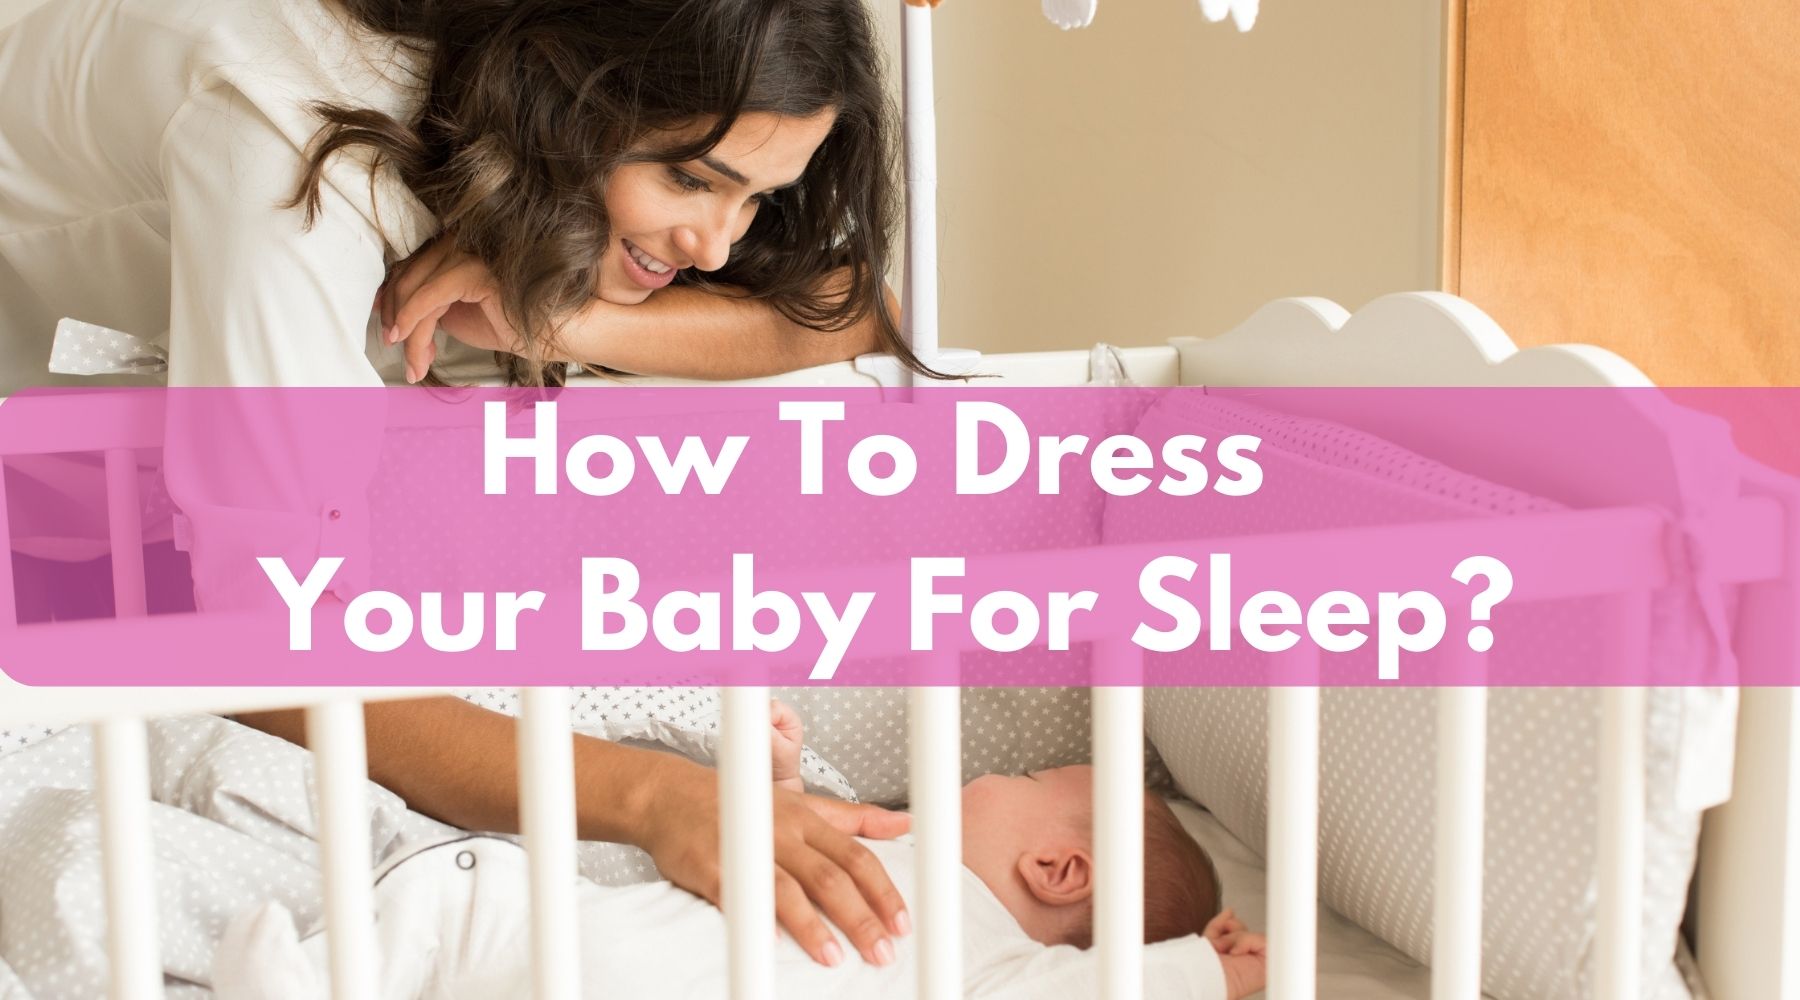 How to Dress Your Baby For Sleep: Safe & Comfy Nightwear Tips